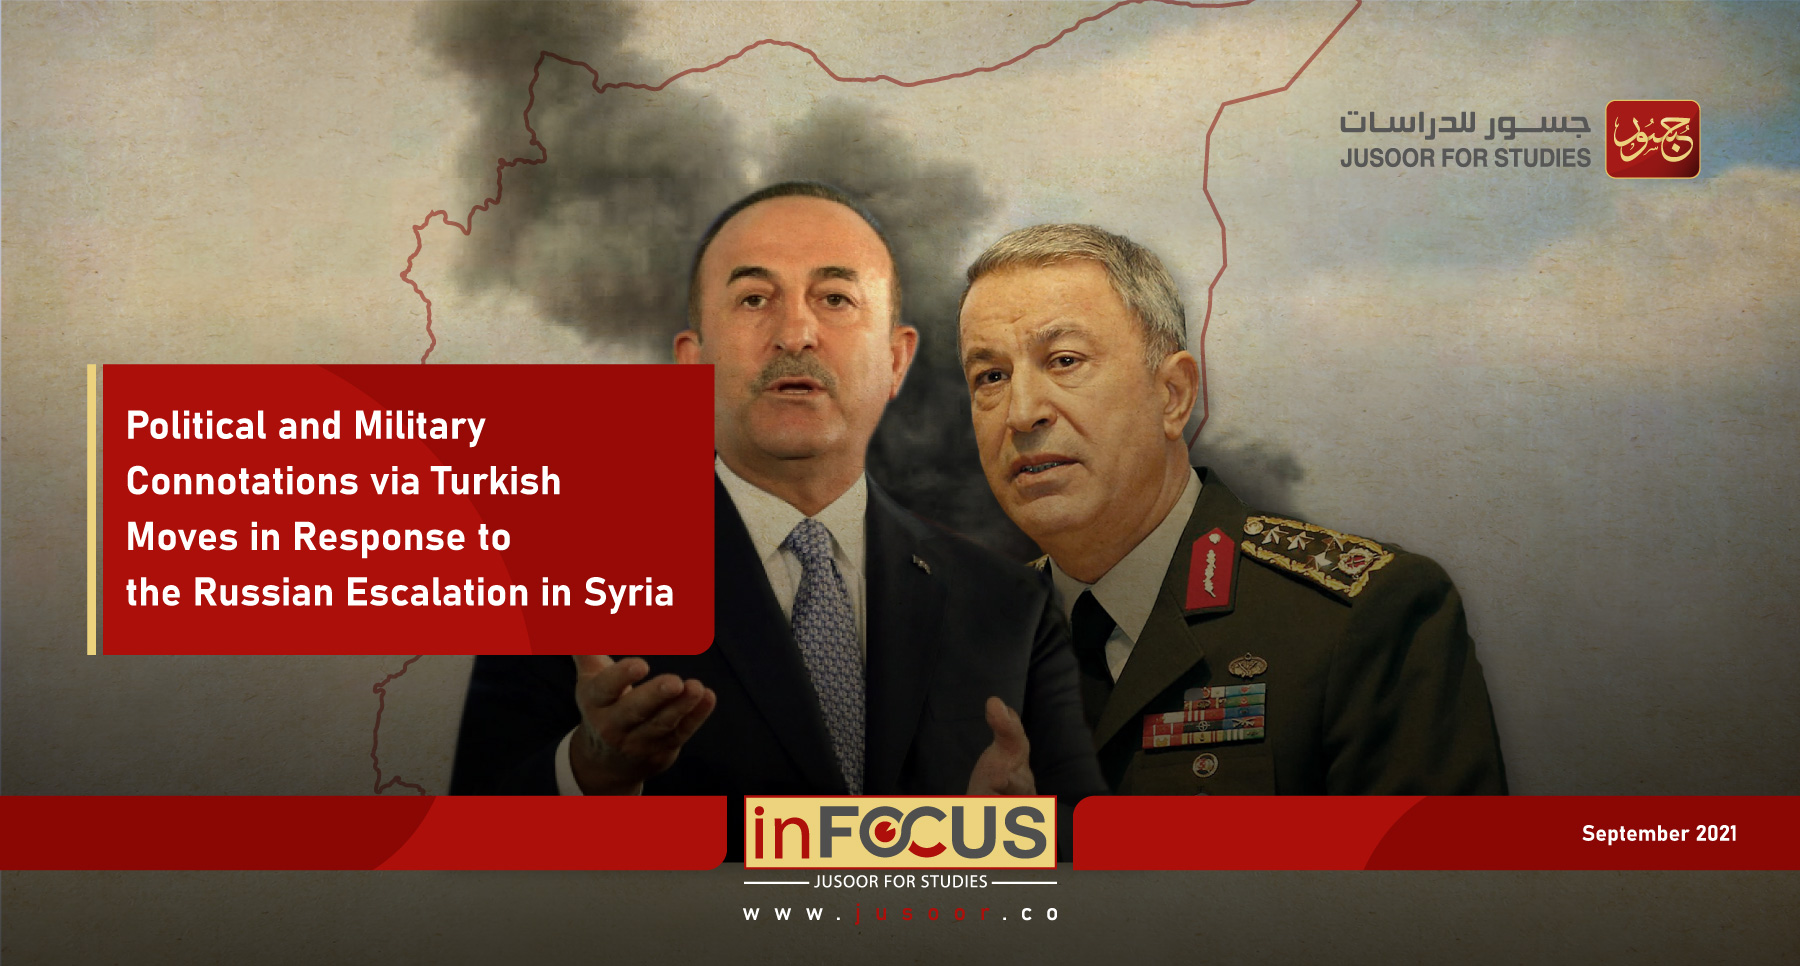 Political and Military Connotations via Turkish Moves in Response to the Russian Escalation in Syria